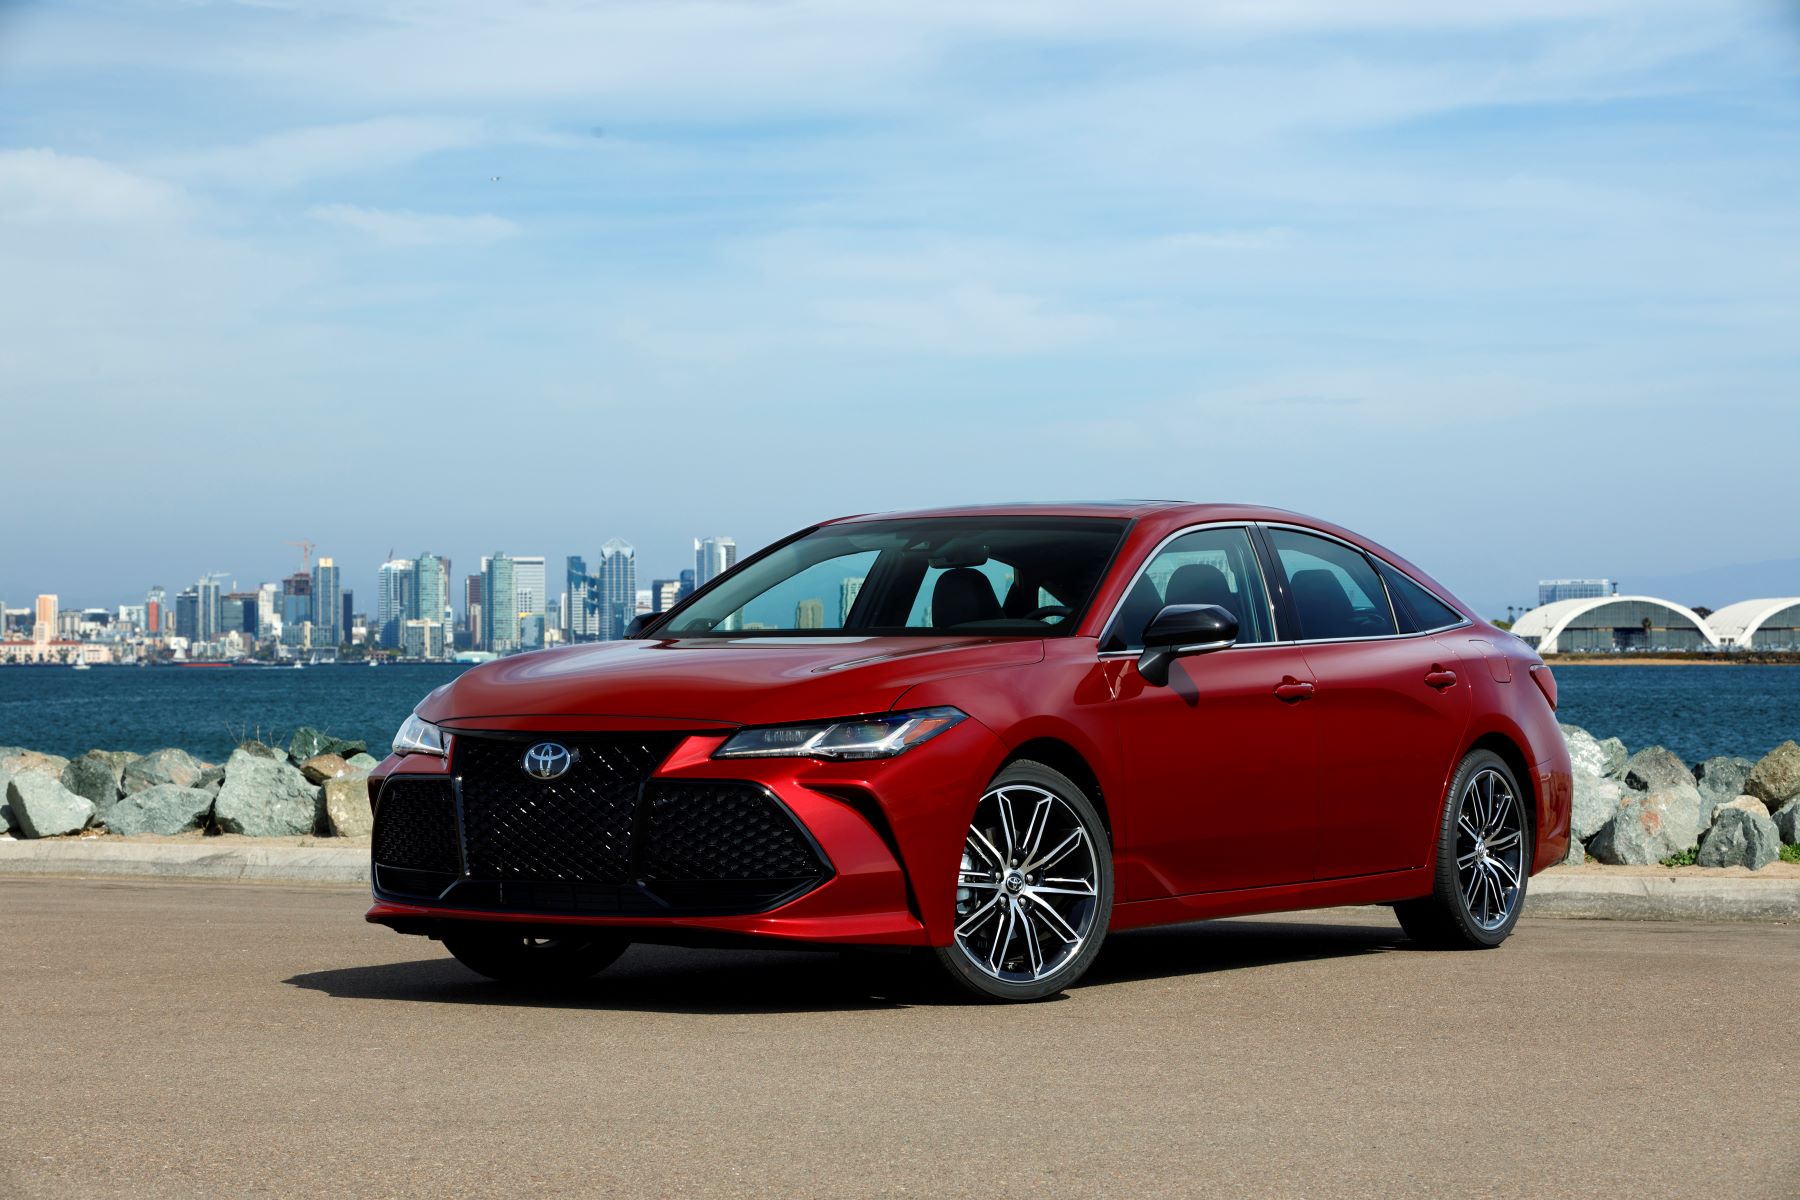 2022 Toyota Avalon Touring full-size sedan in red parked on a beach with a city skyline background